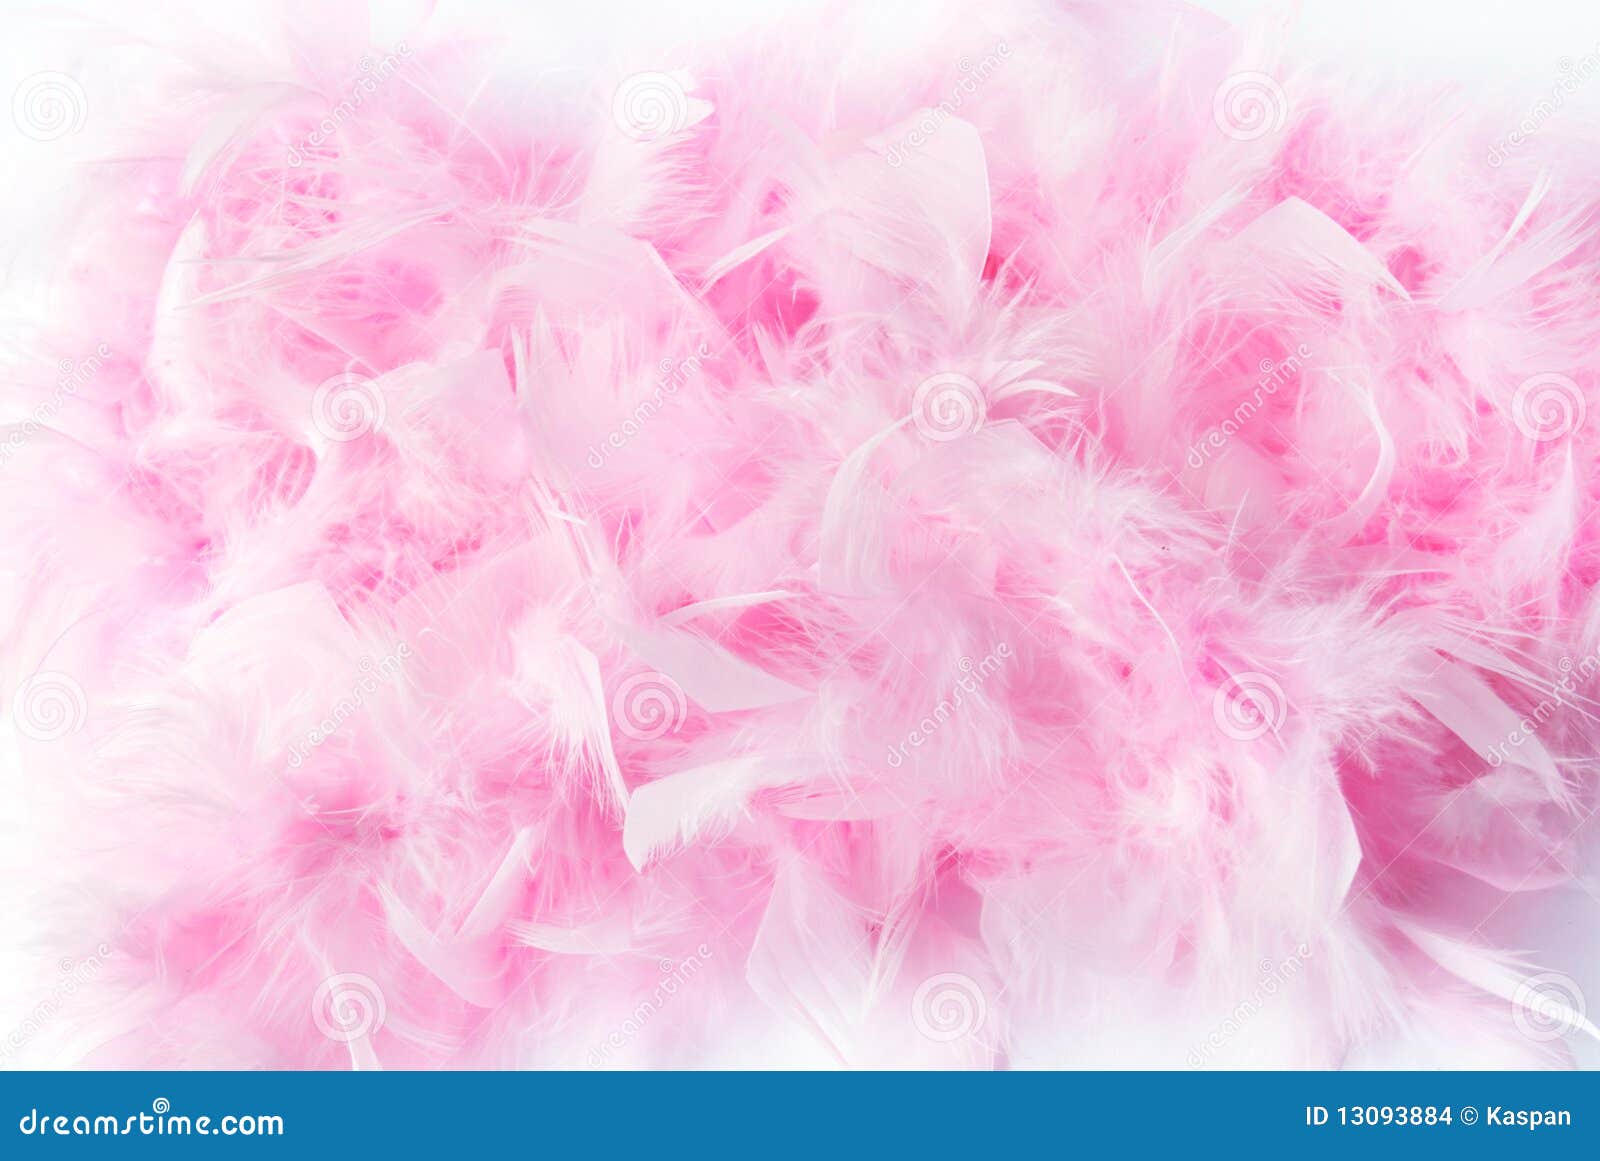 Pink Feather Boa Frame On White Background Stock Photo - Download